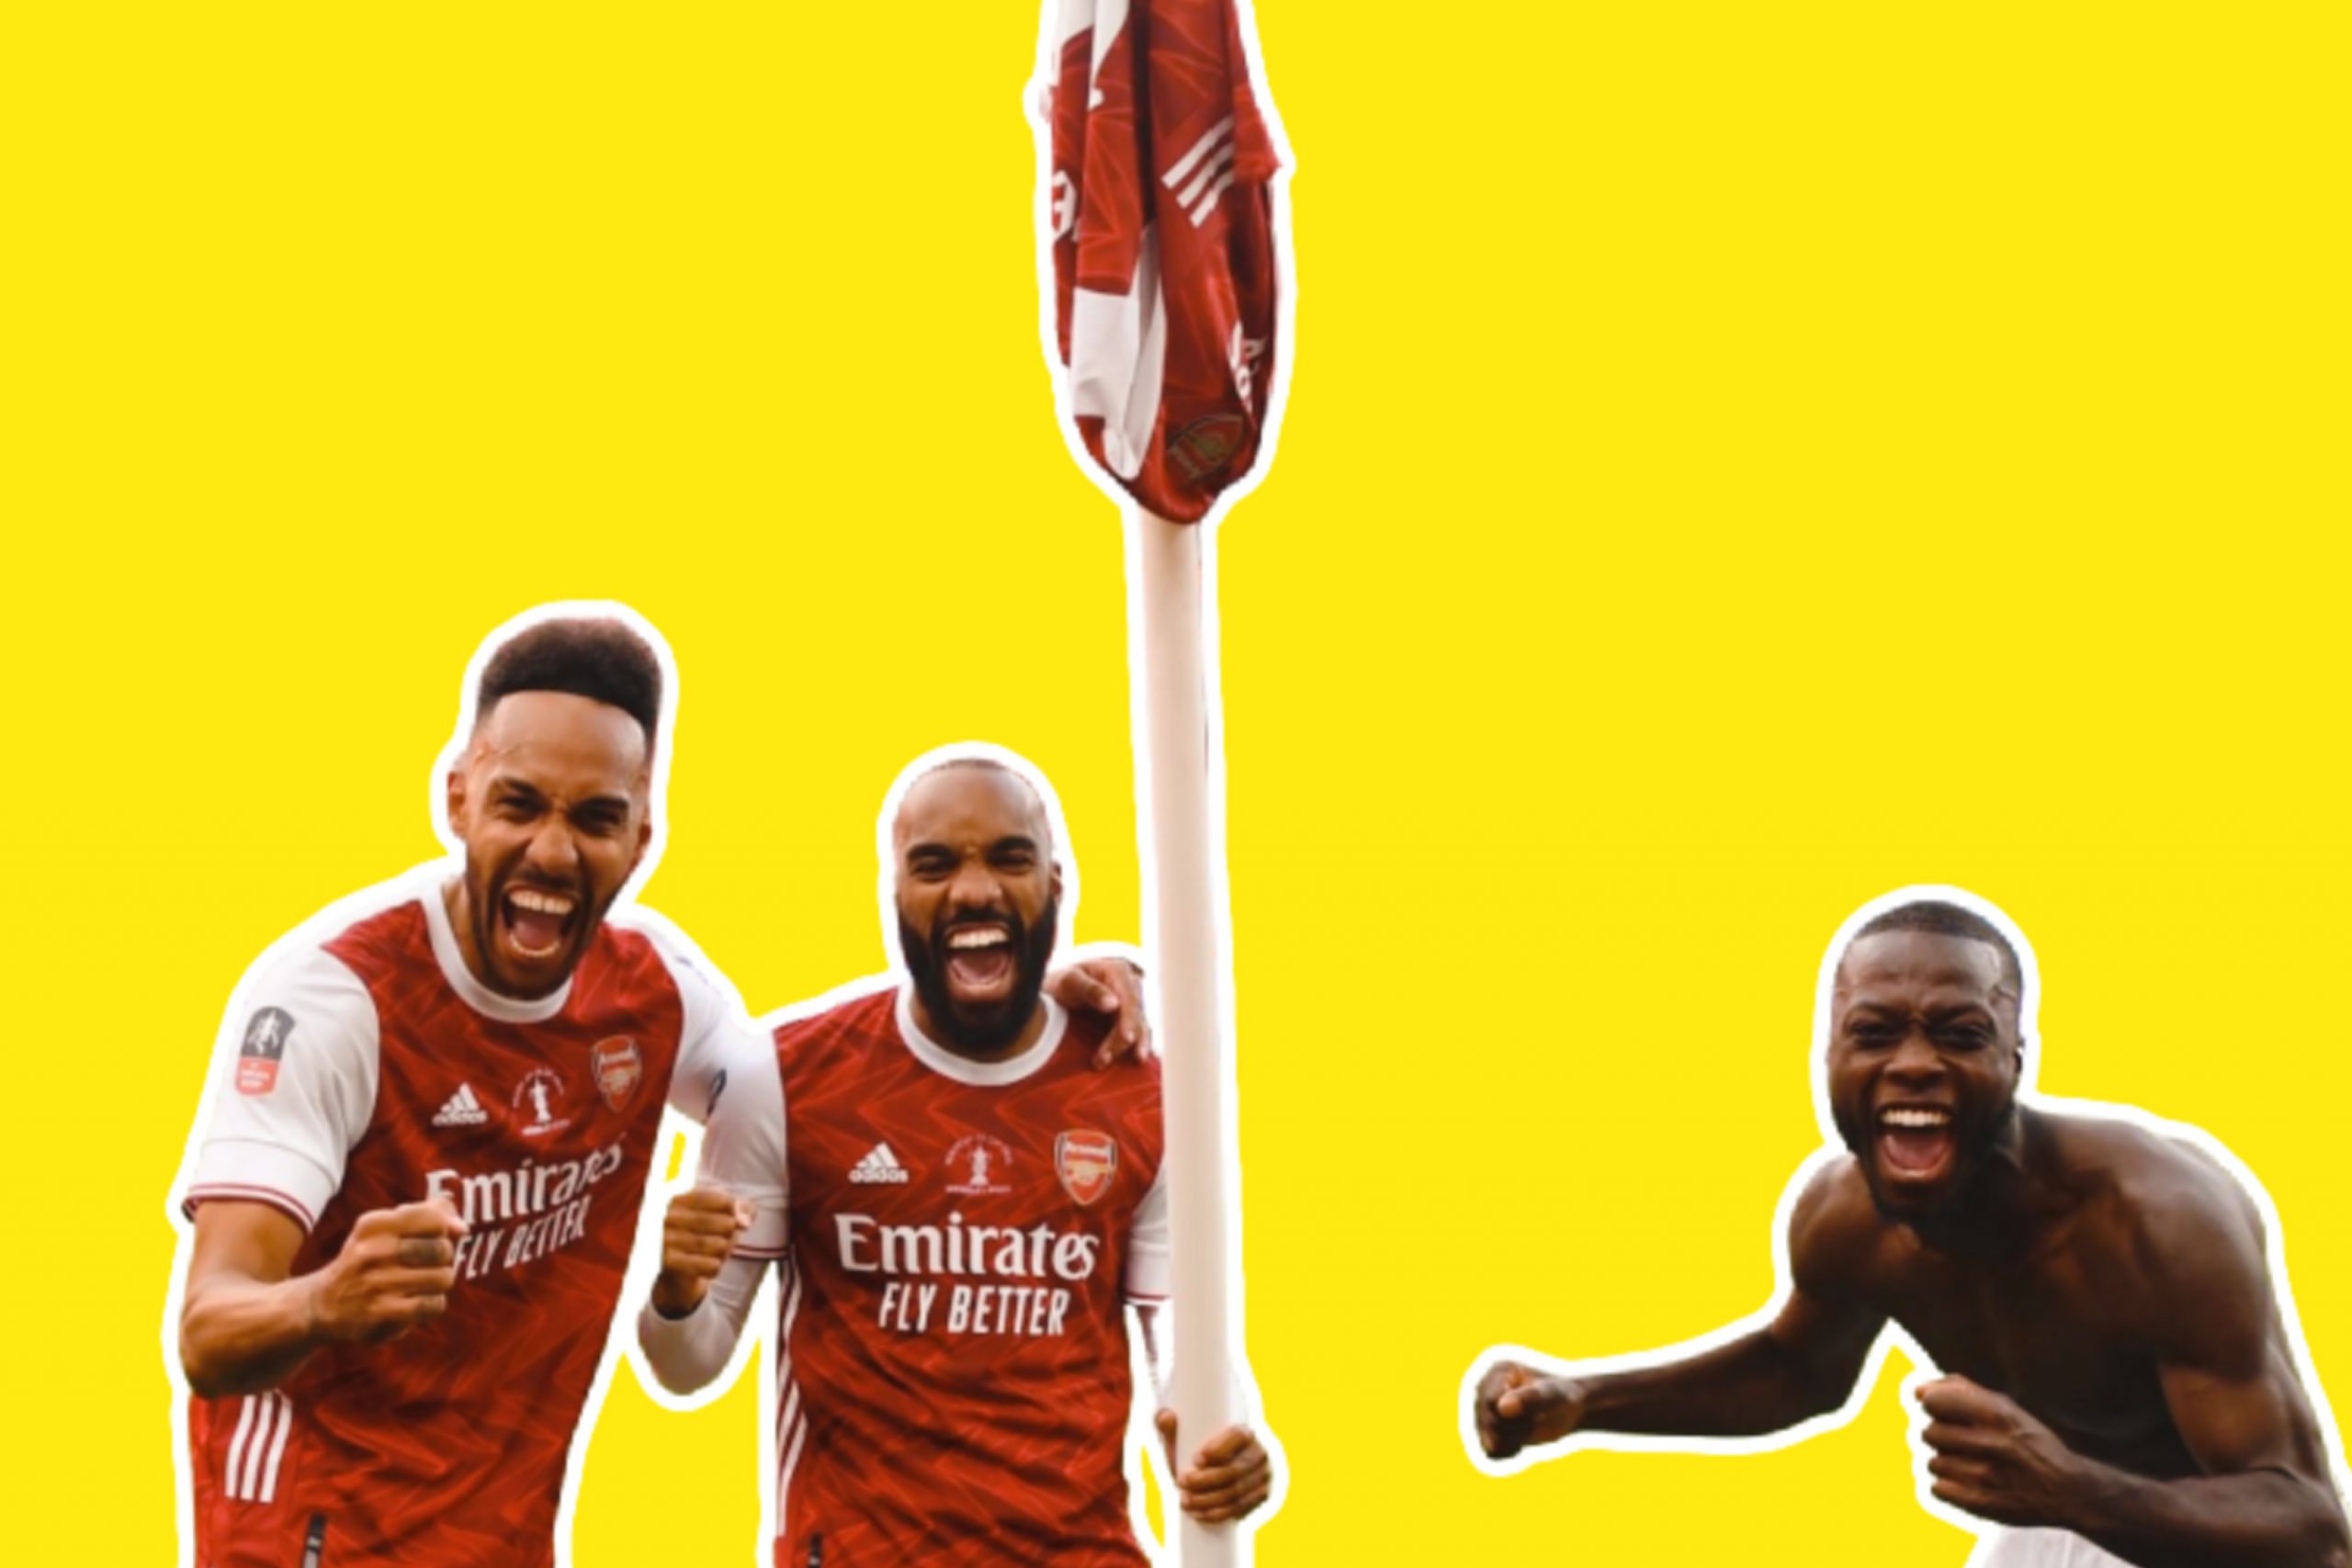 New footage captures what Aubameyang said while celebrating with the corner flag after FA Cup win